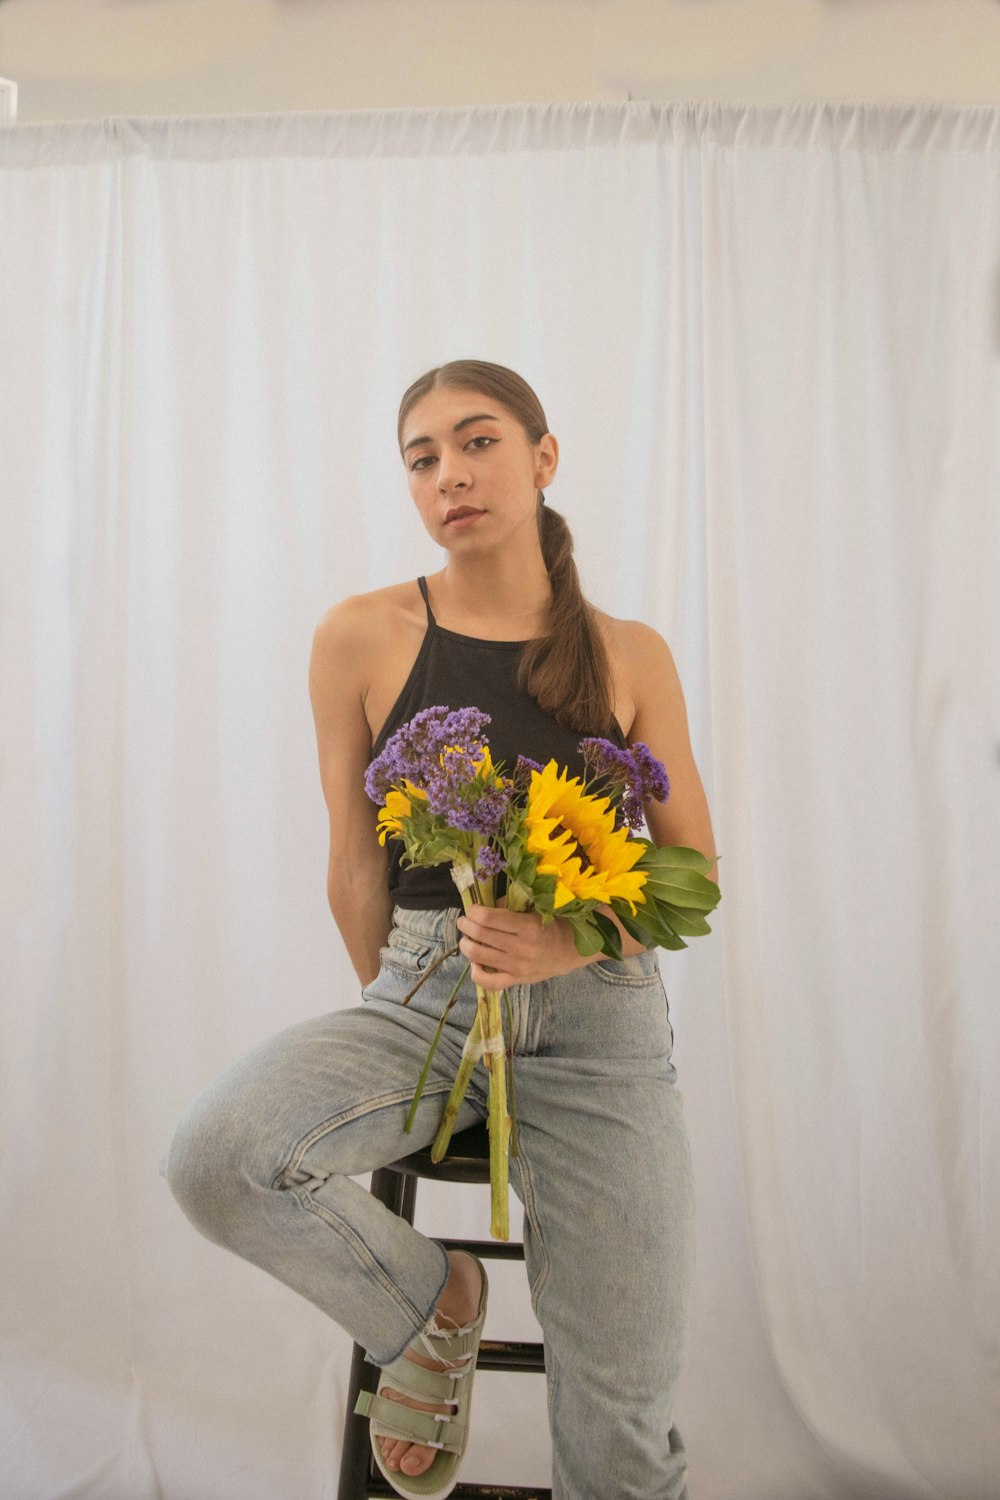 a person sitting on a stool holding flowers